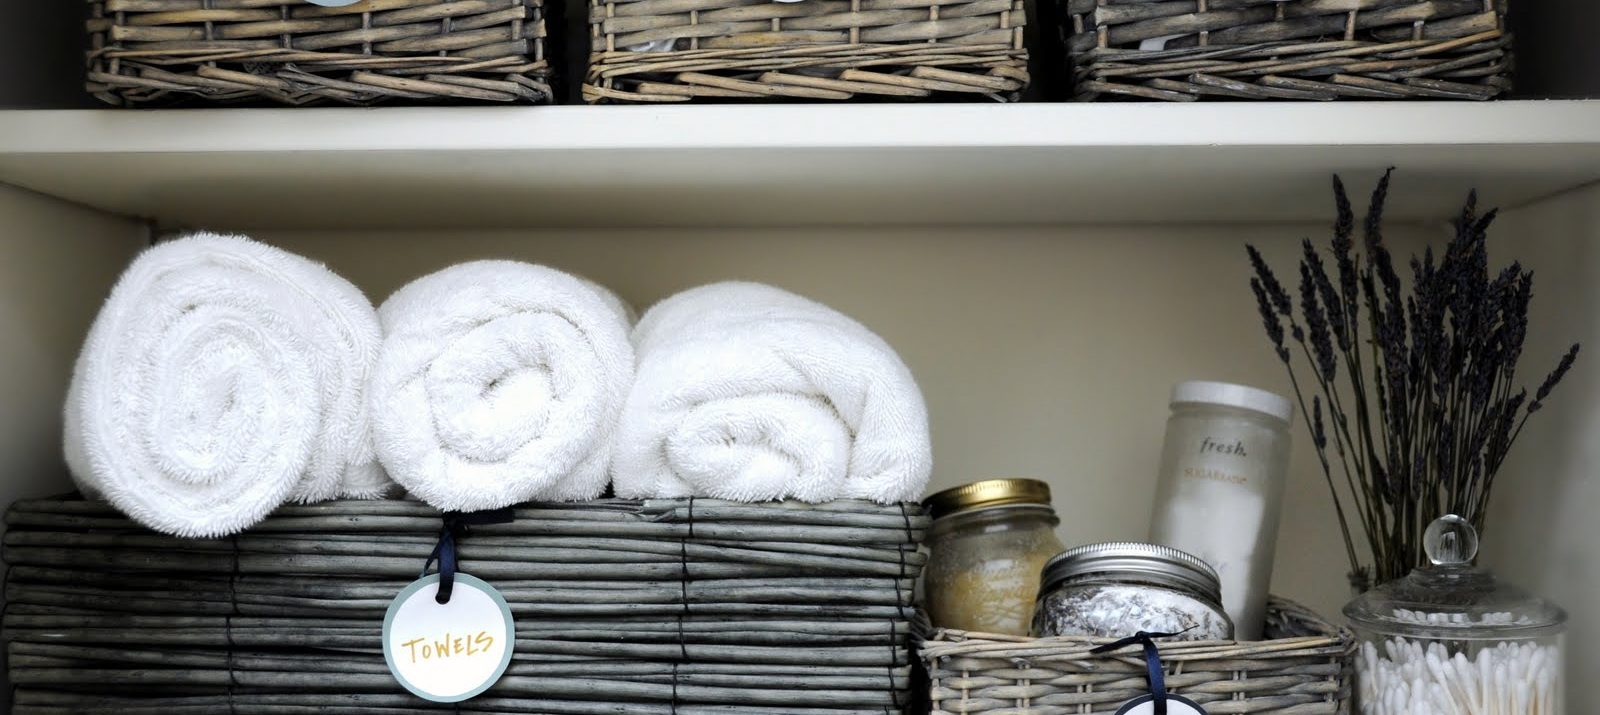 how to organize linen closet: declutter, sort by category, and store things in storage baskets with labels